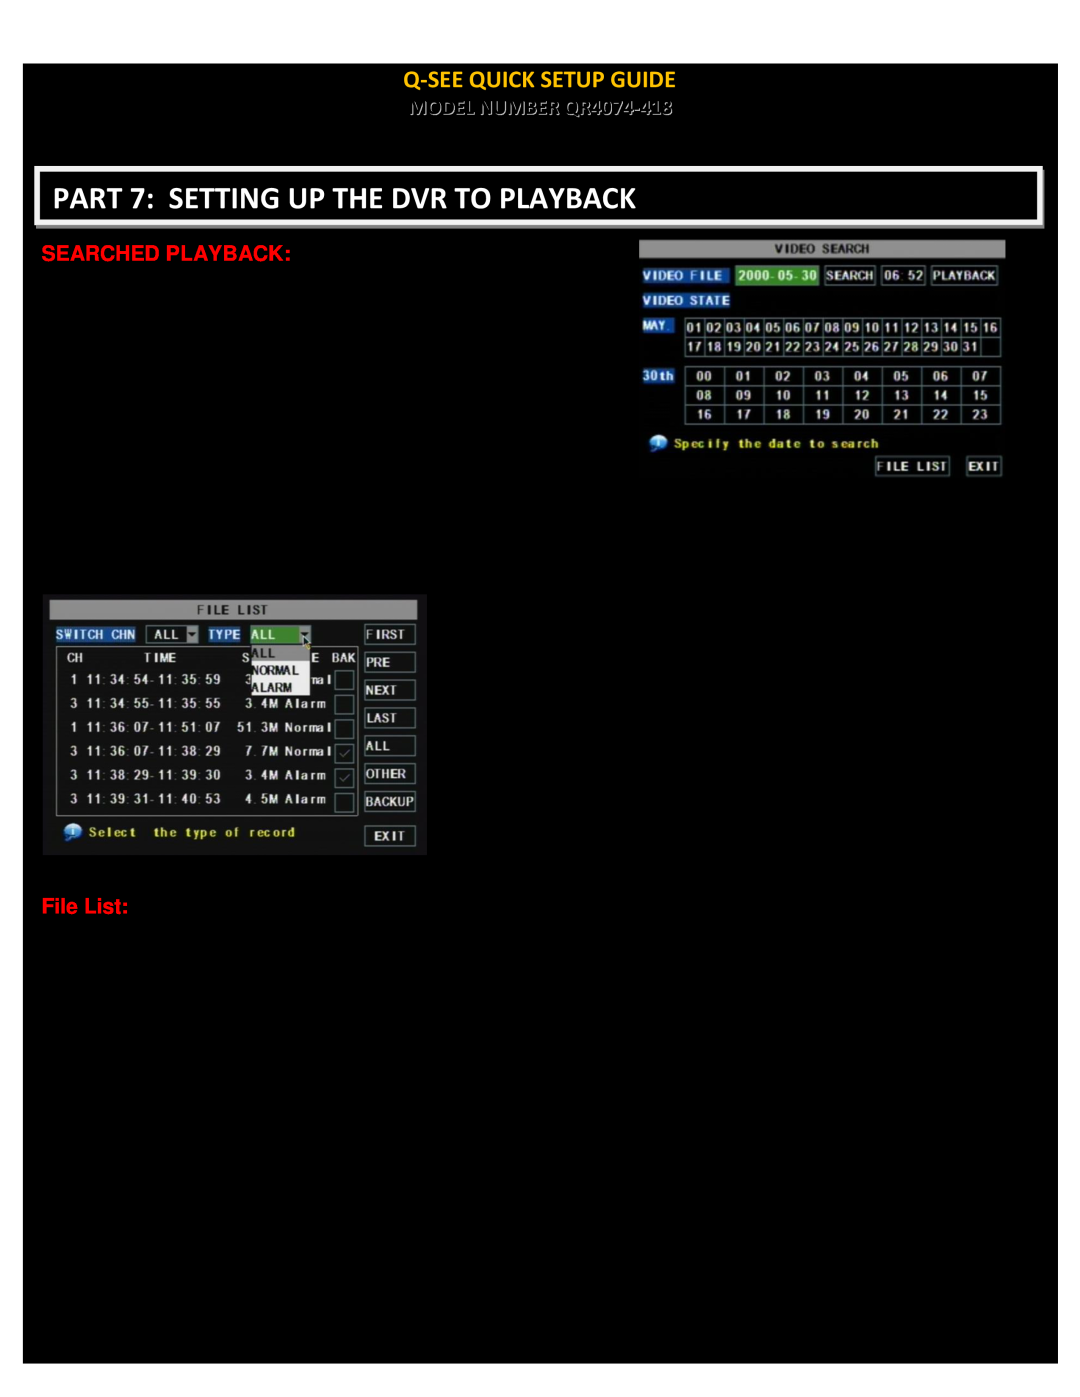 Q-See PART 7 SETTING UP THE DVR TO PLAYBACK, Q-Seequick Setup Guide, MODEL NUMBER QR4074-418, Searched Playback 